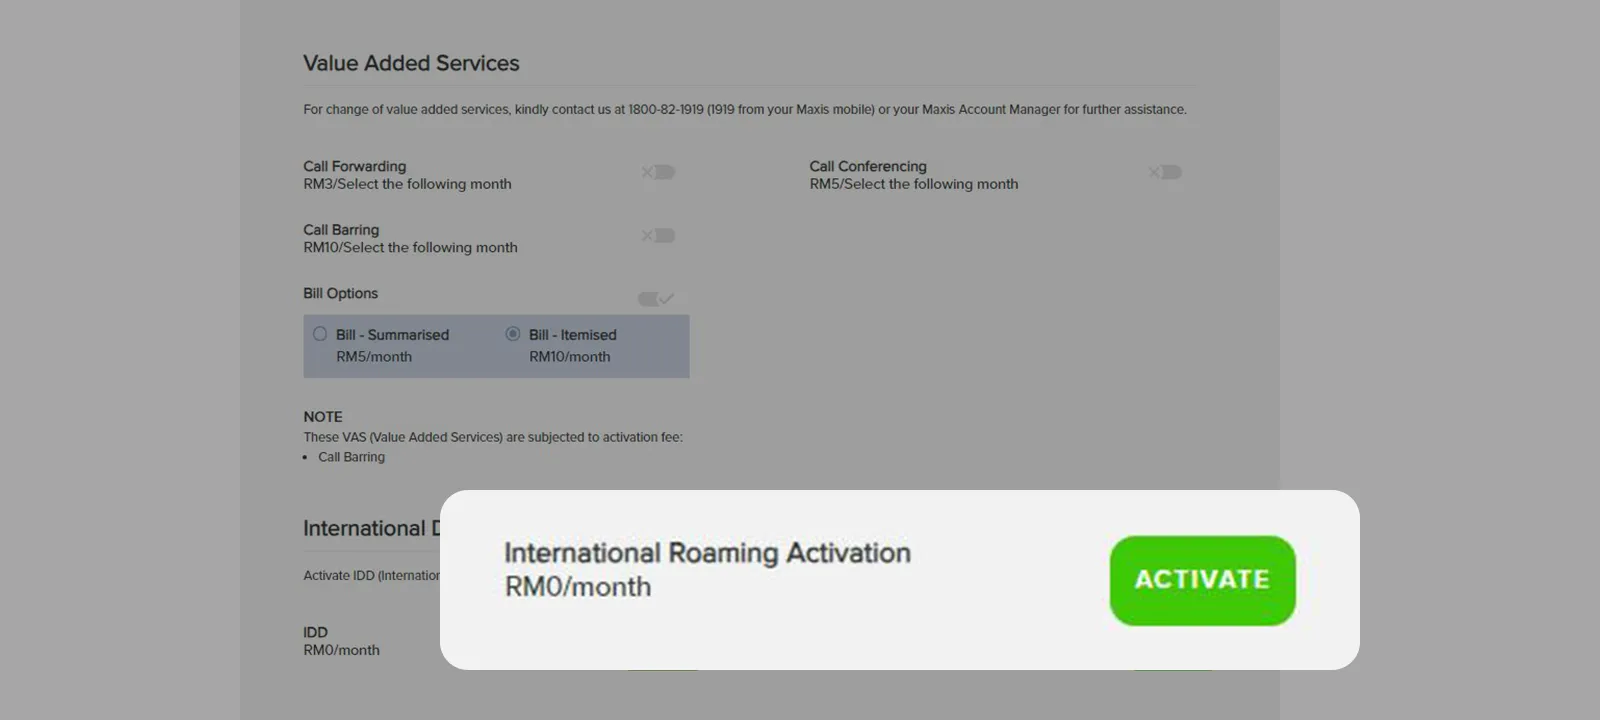 Click Activate to activate international roaming for the mobile device Step 3